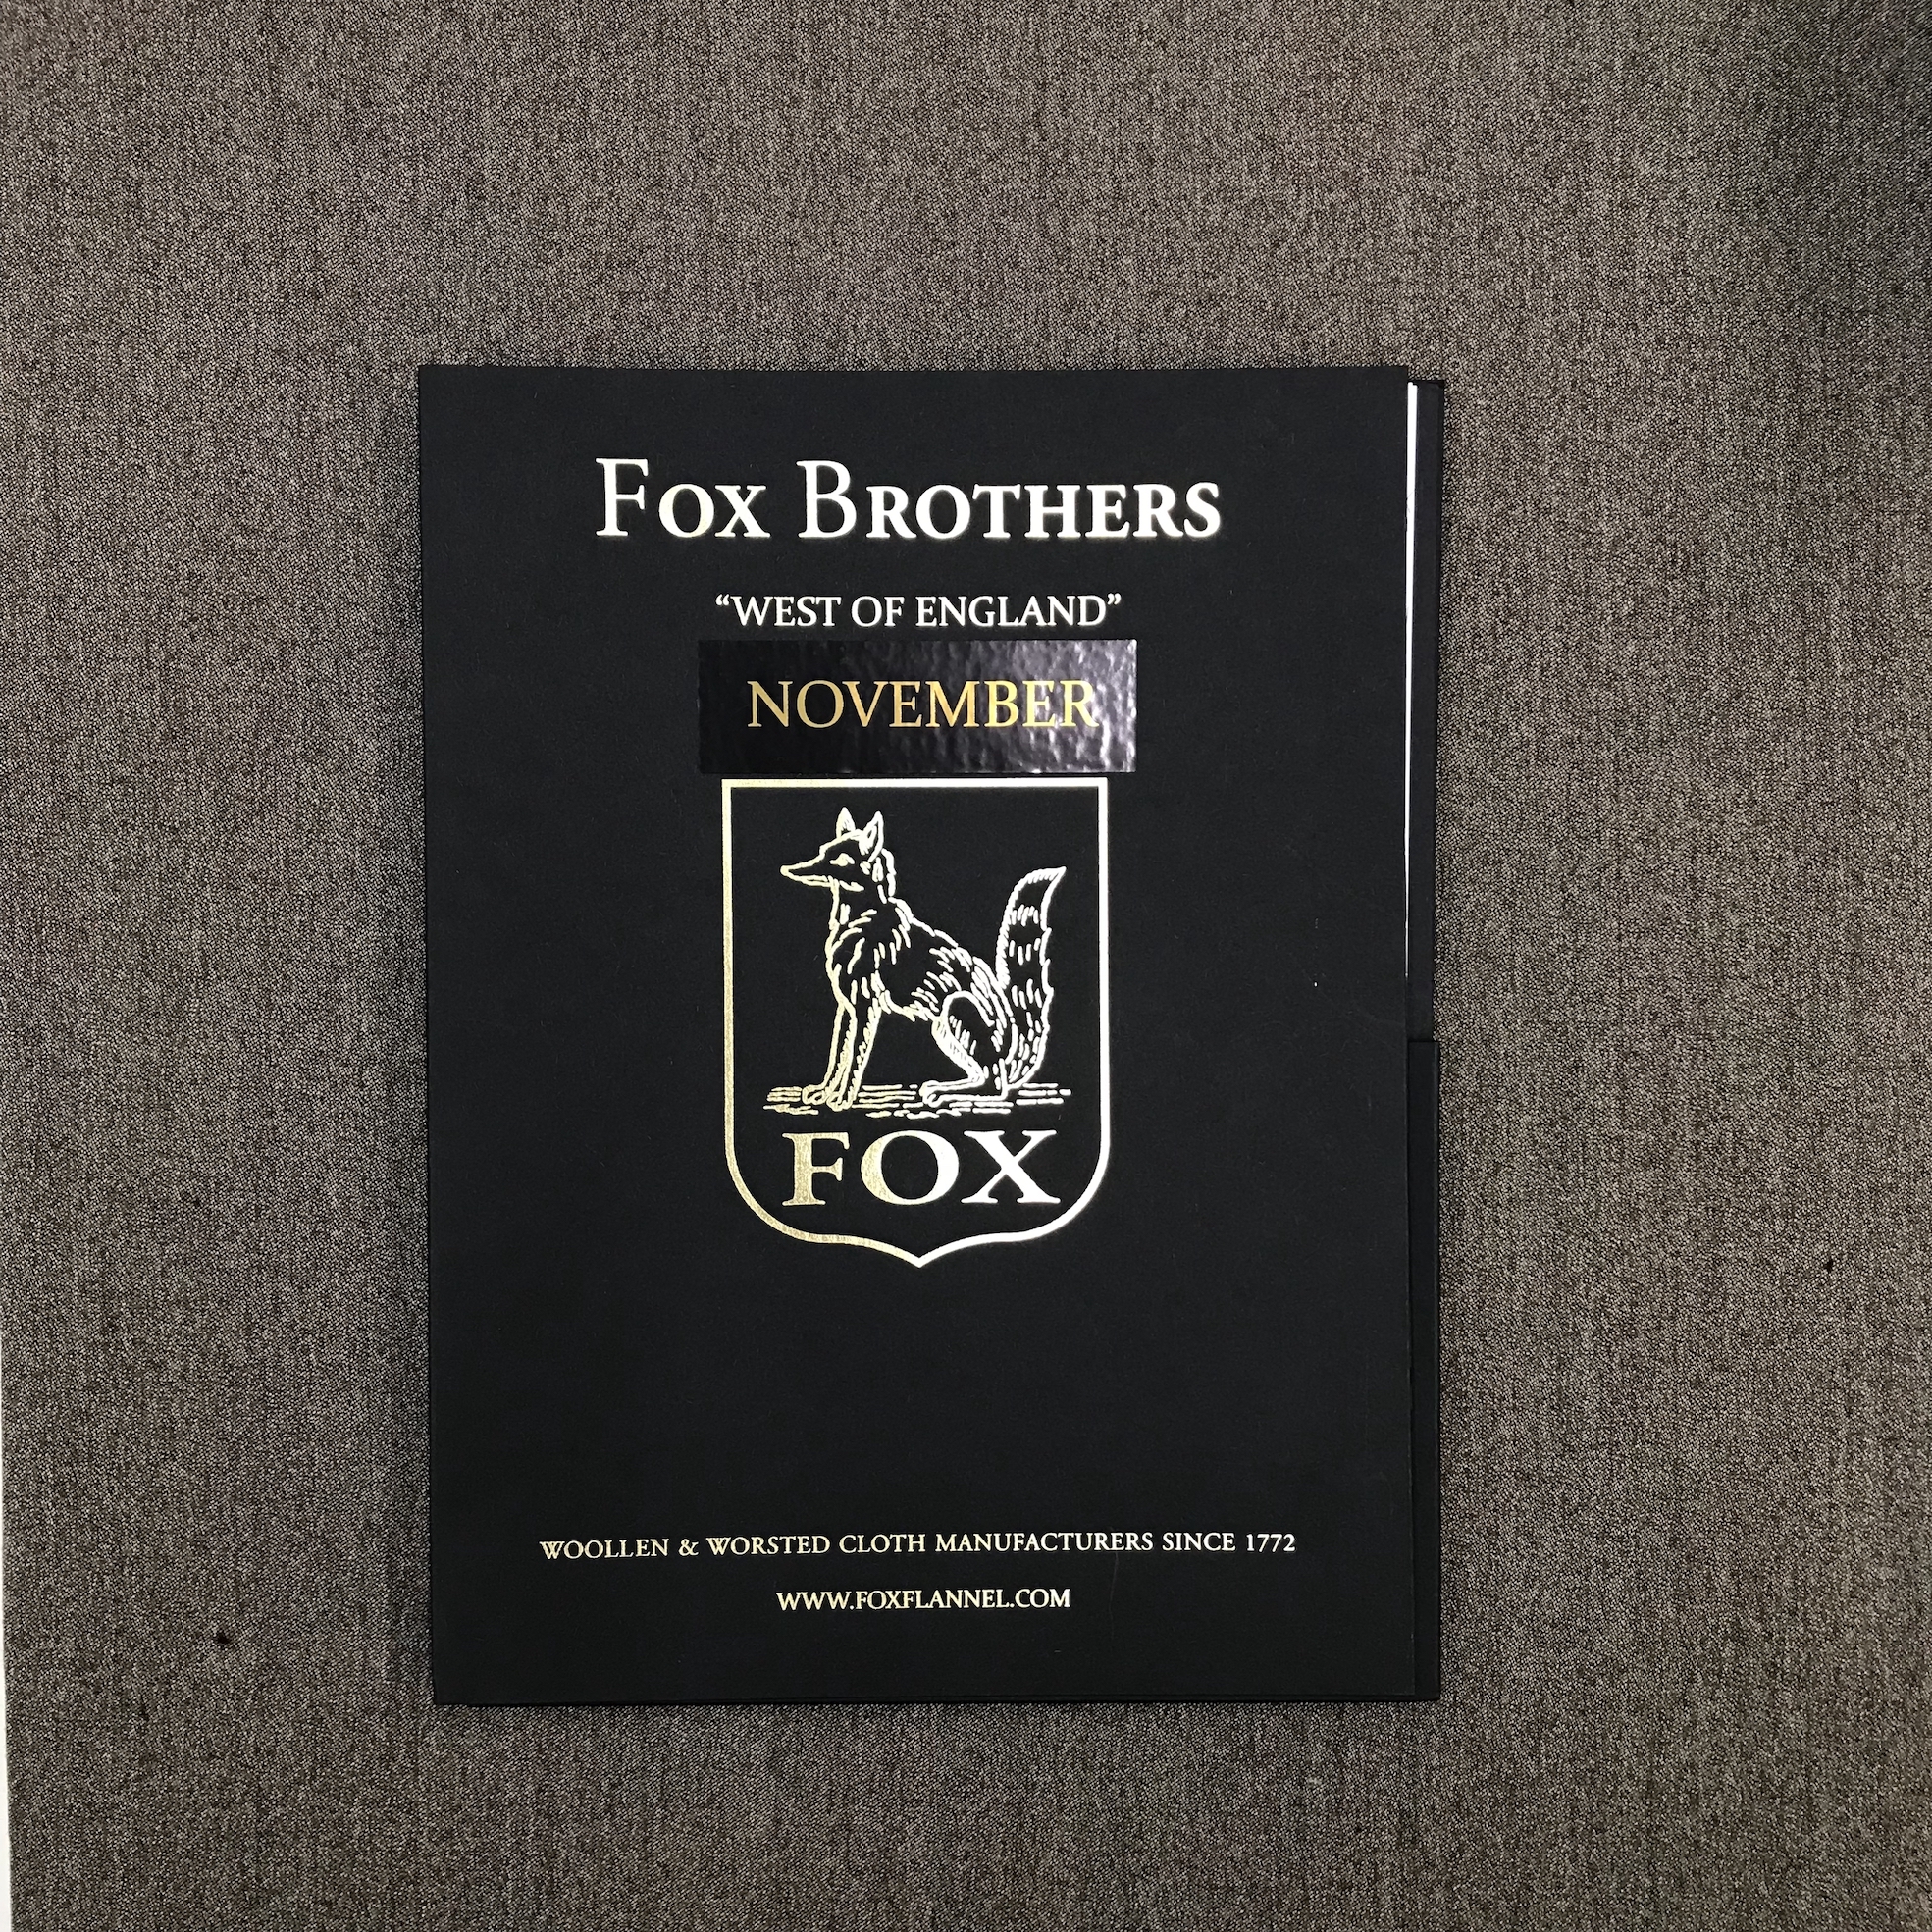 FOX BROTHERS 250Year Anniversary collection 「 NOVEMBER 」